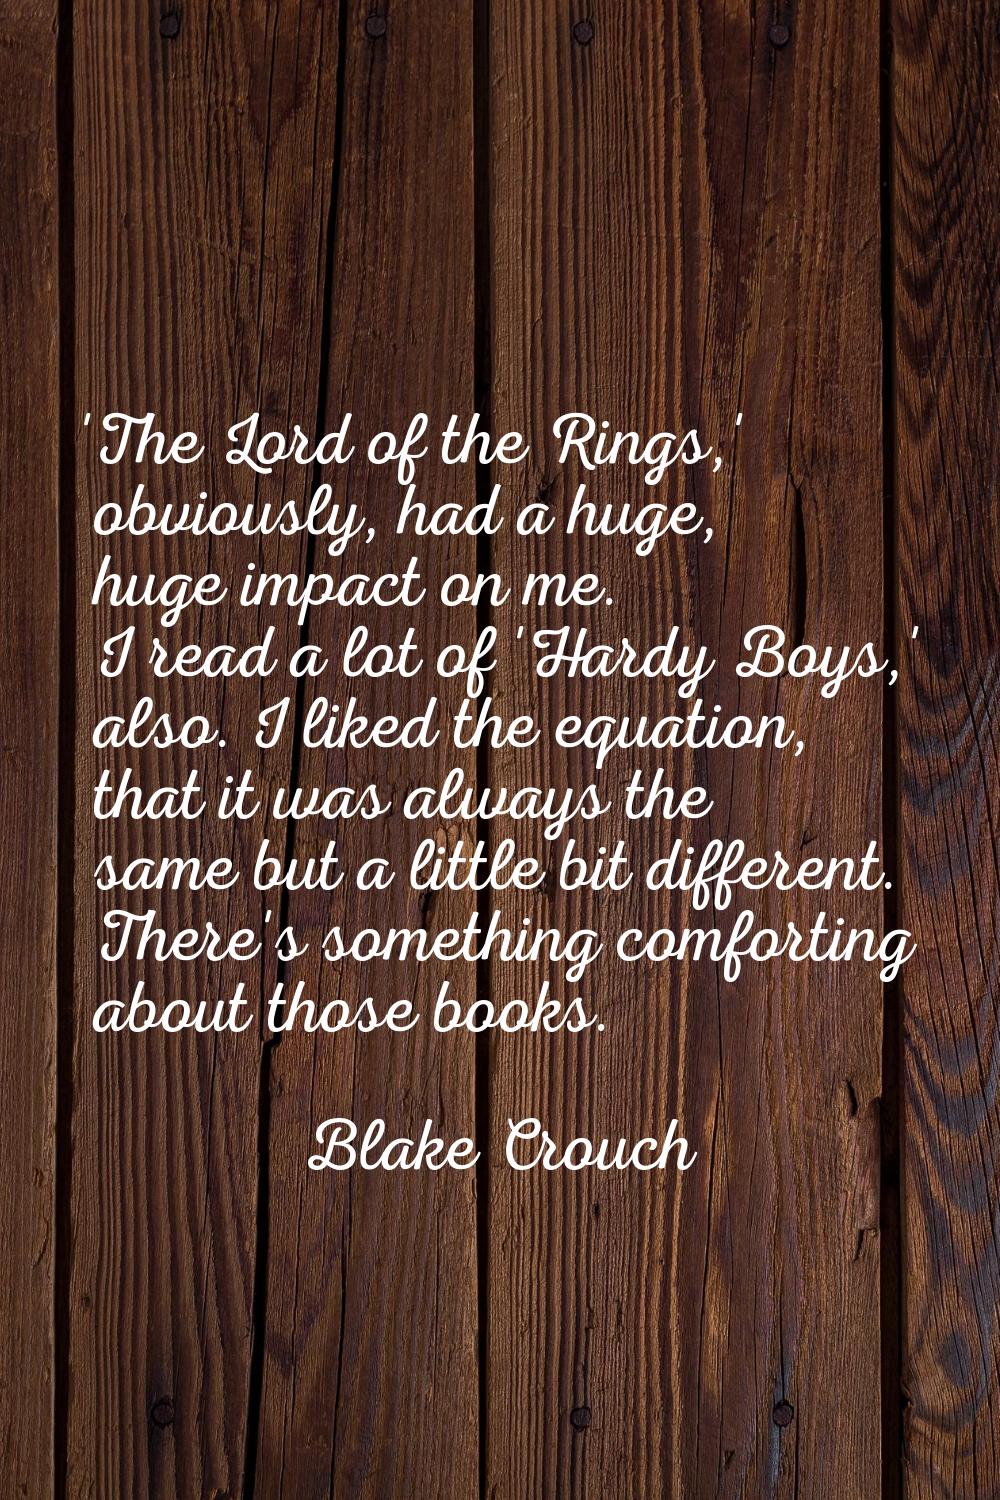 'The Lord of the Rings,' obviously, had a huge, huge impact on me. I read a lot of 'Hardy Boys,' al